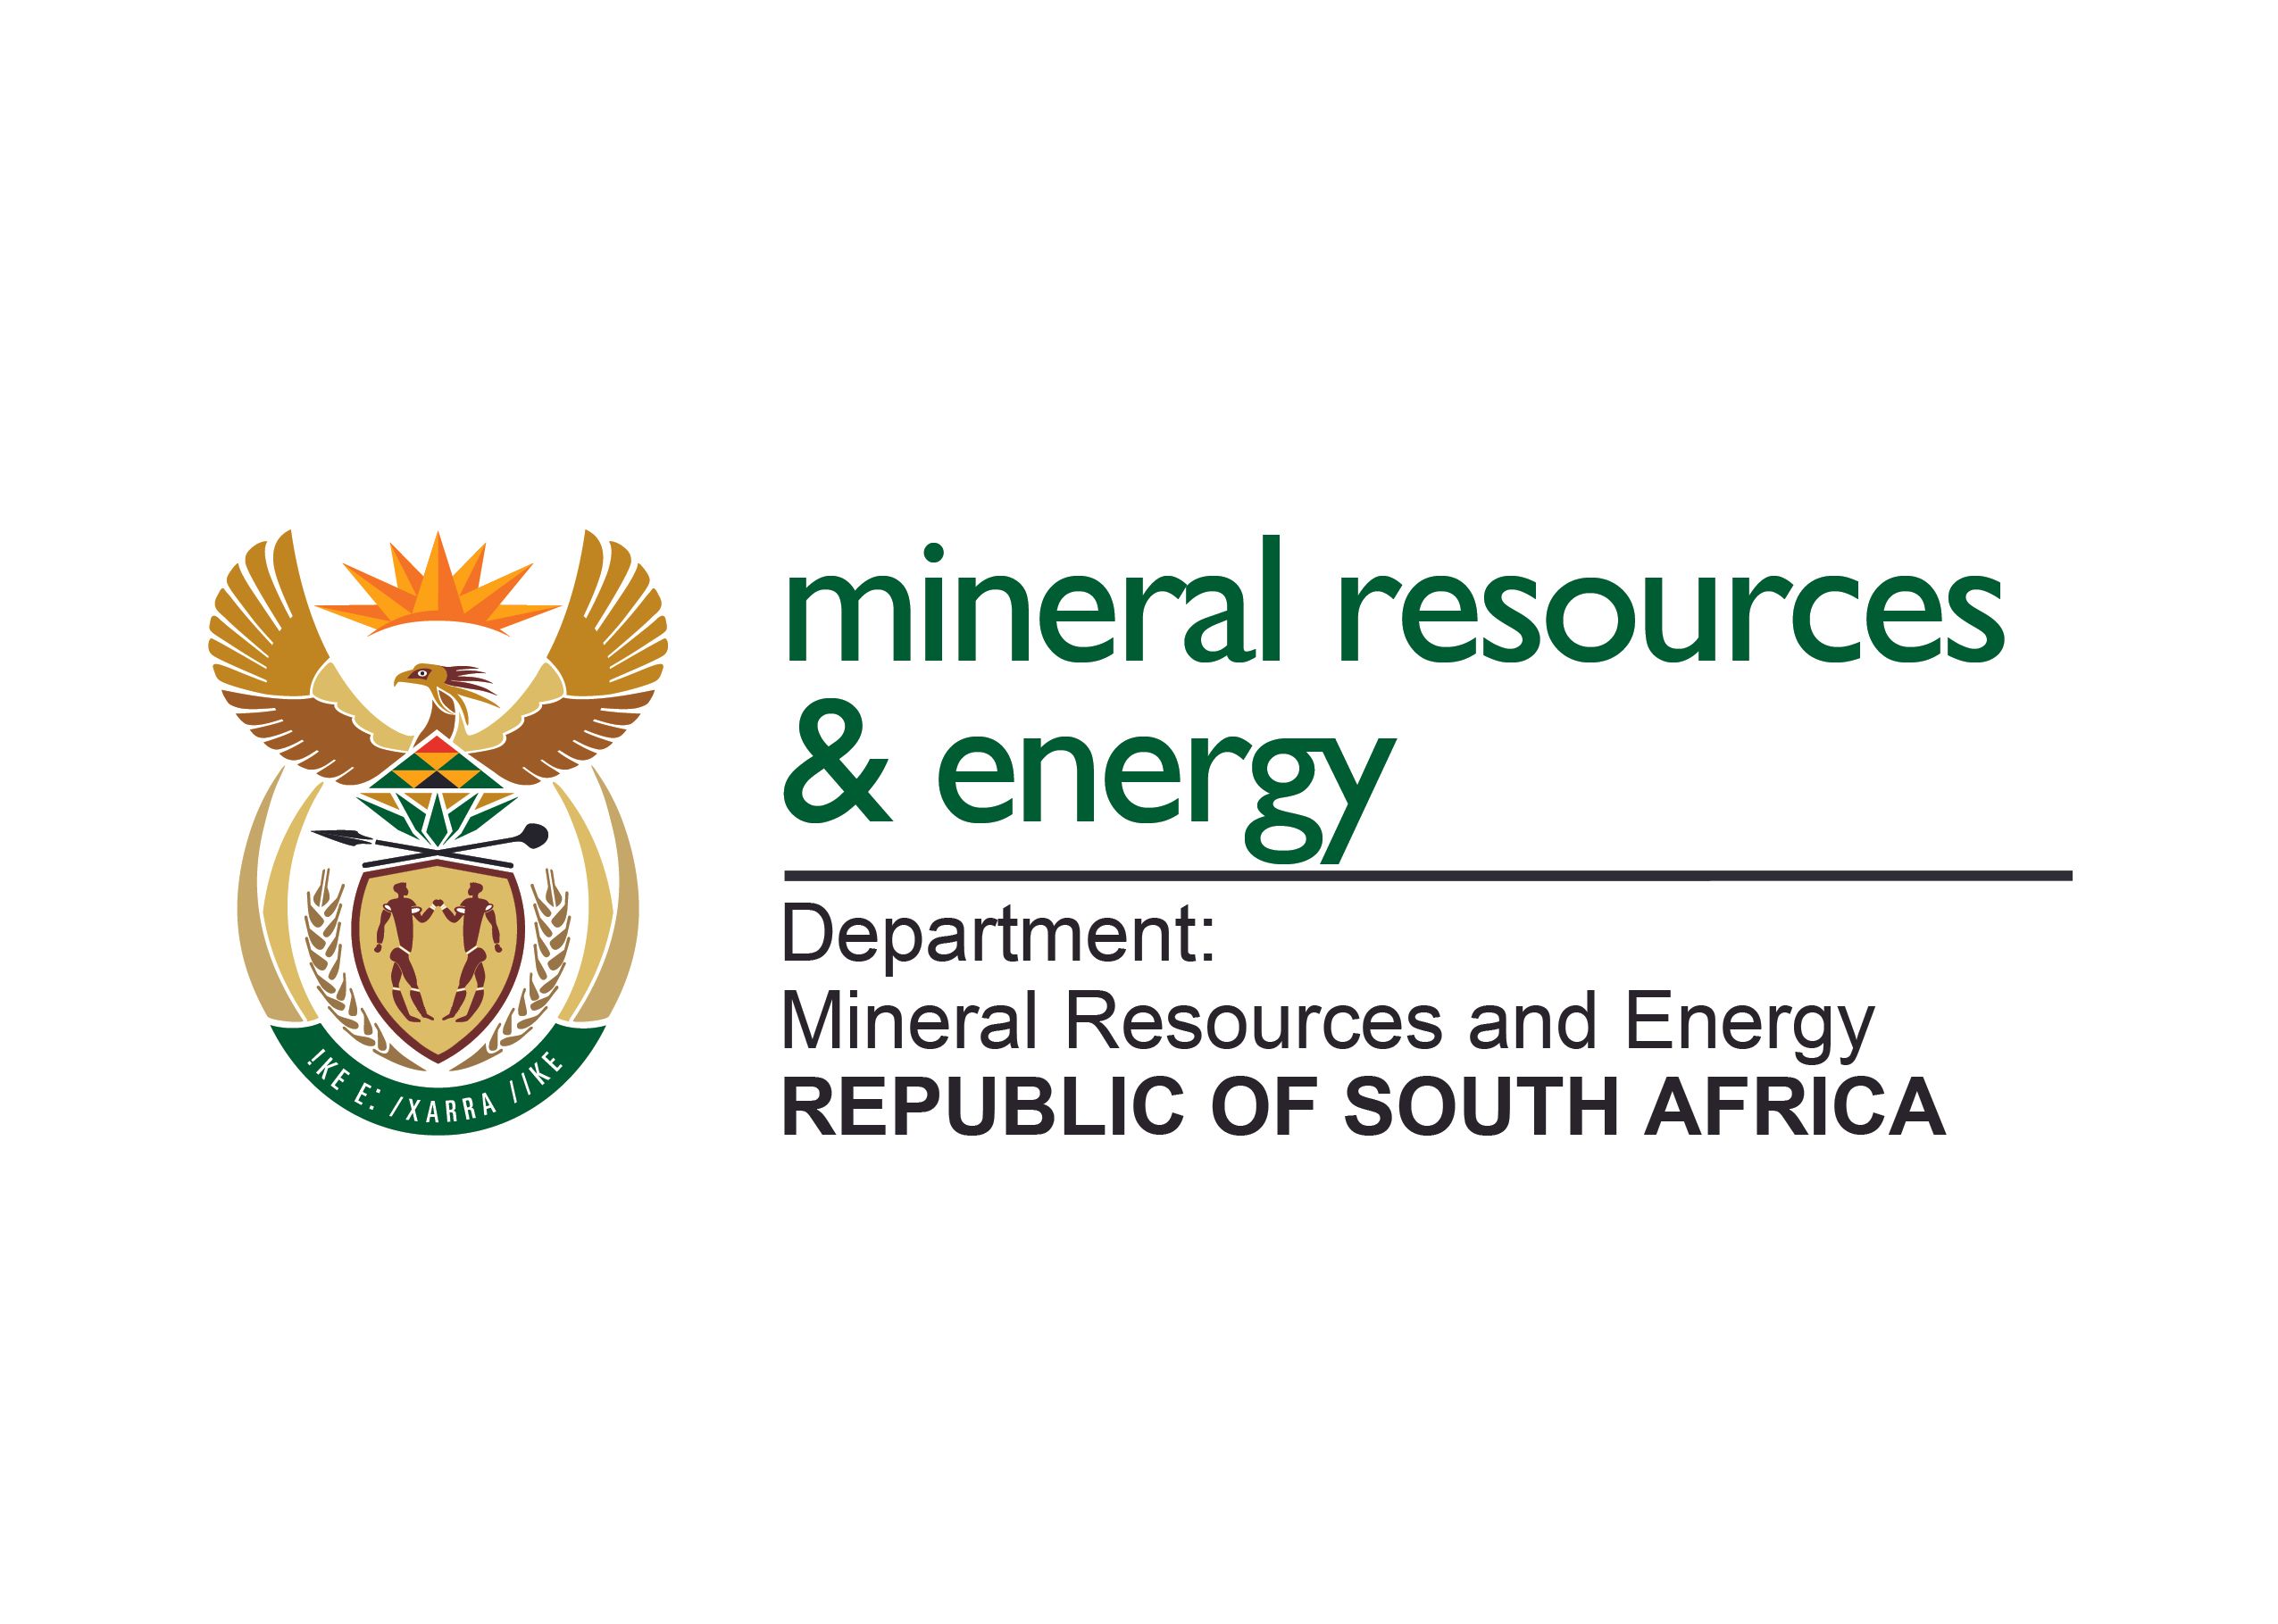 Mineral resources & energy